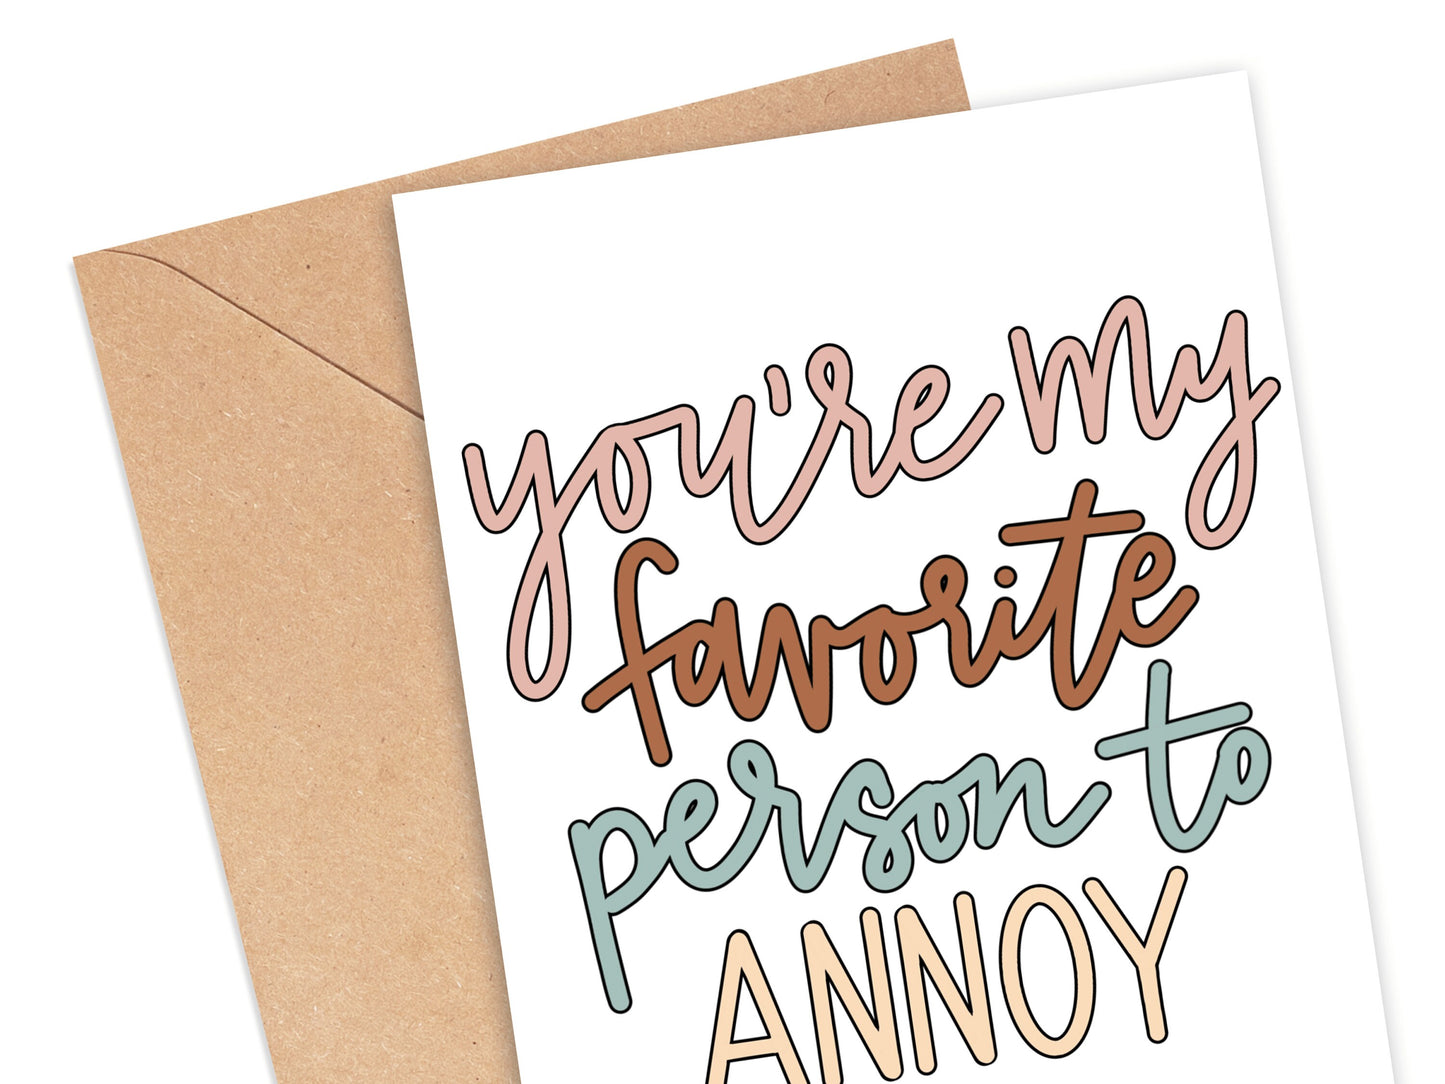 You're My Favorite Person to Annoy Card Simply Happy Cards